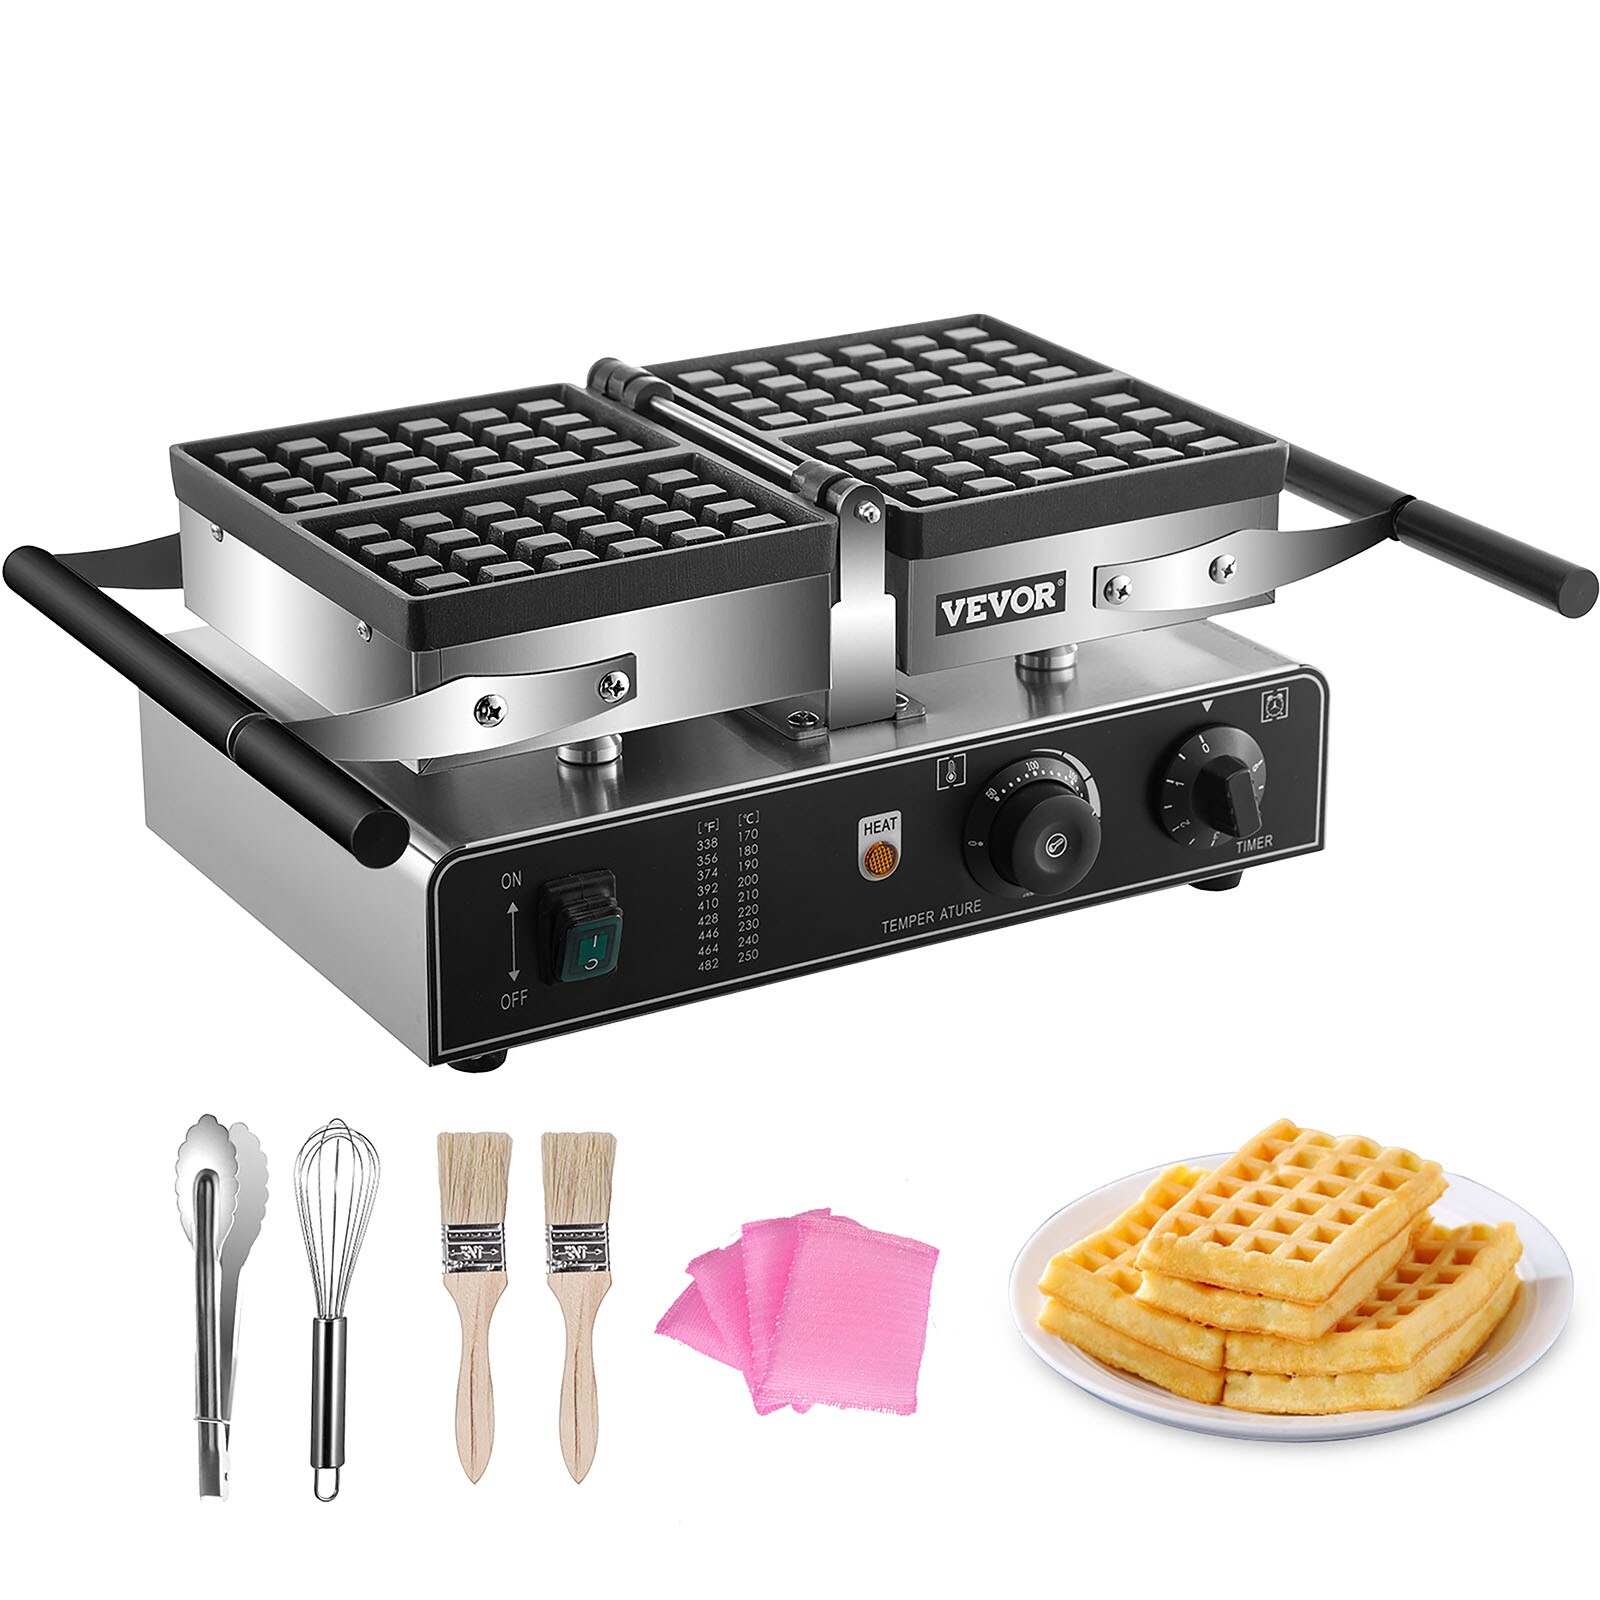 Chefman Stainless Steel Mini Waffle Maker, Knob Control, cETLus Safety  Listed, 1400W, Round Shape, Non-Stick, Mess-Free, Locking Lid